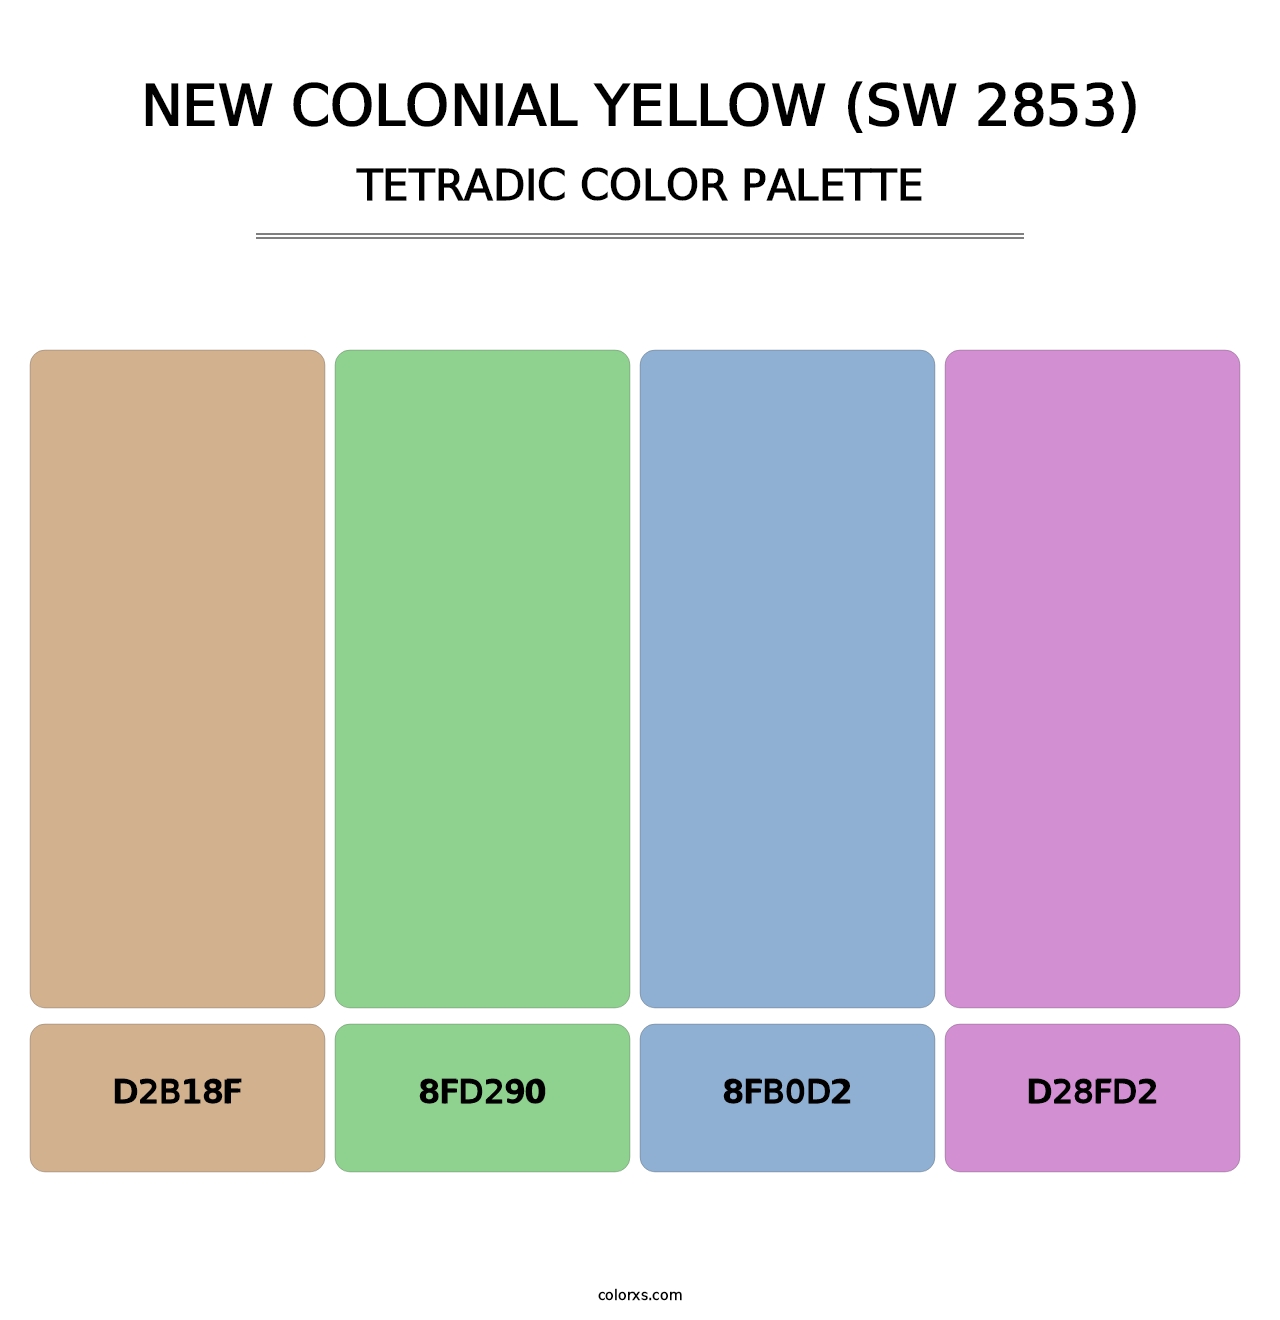 New Colonial Yellow (SW 2853) - Tetradic Color Palette